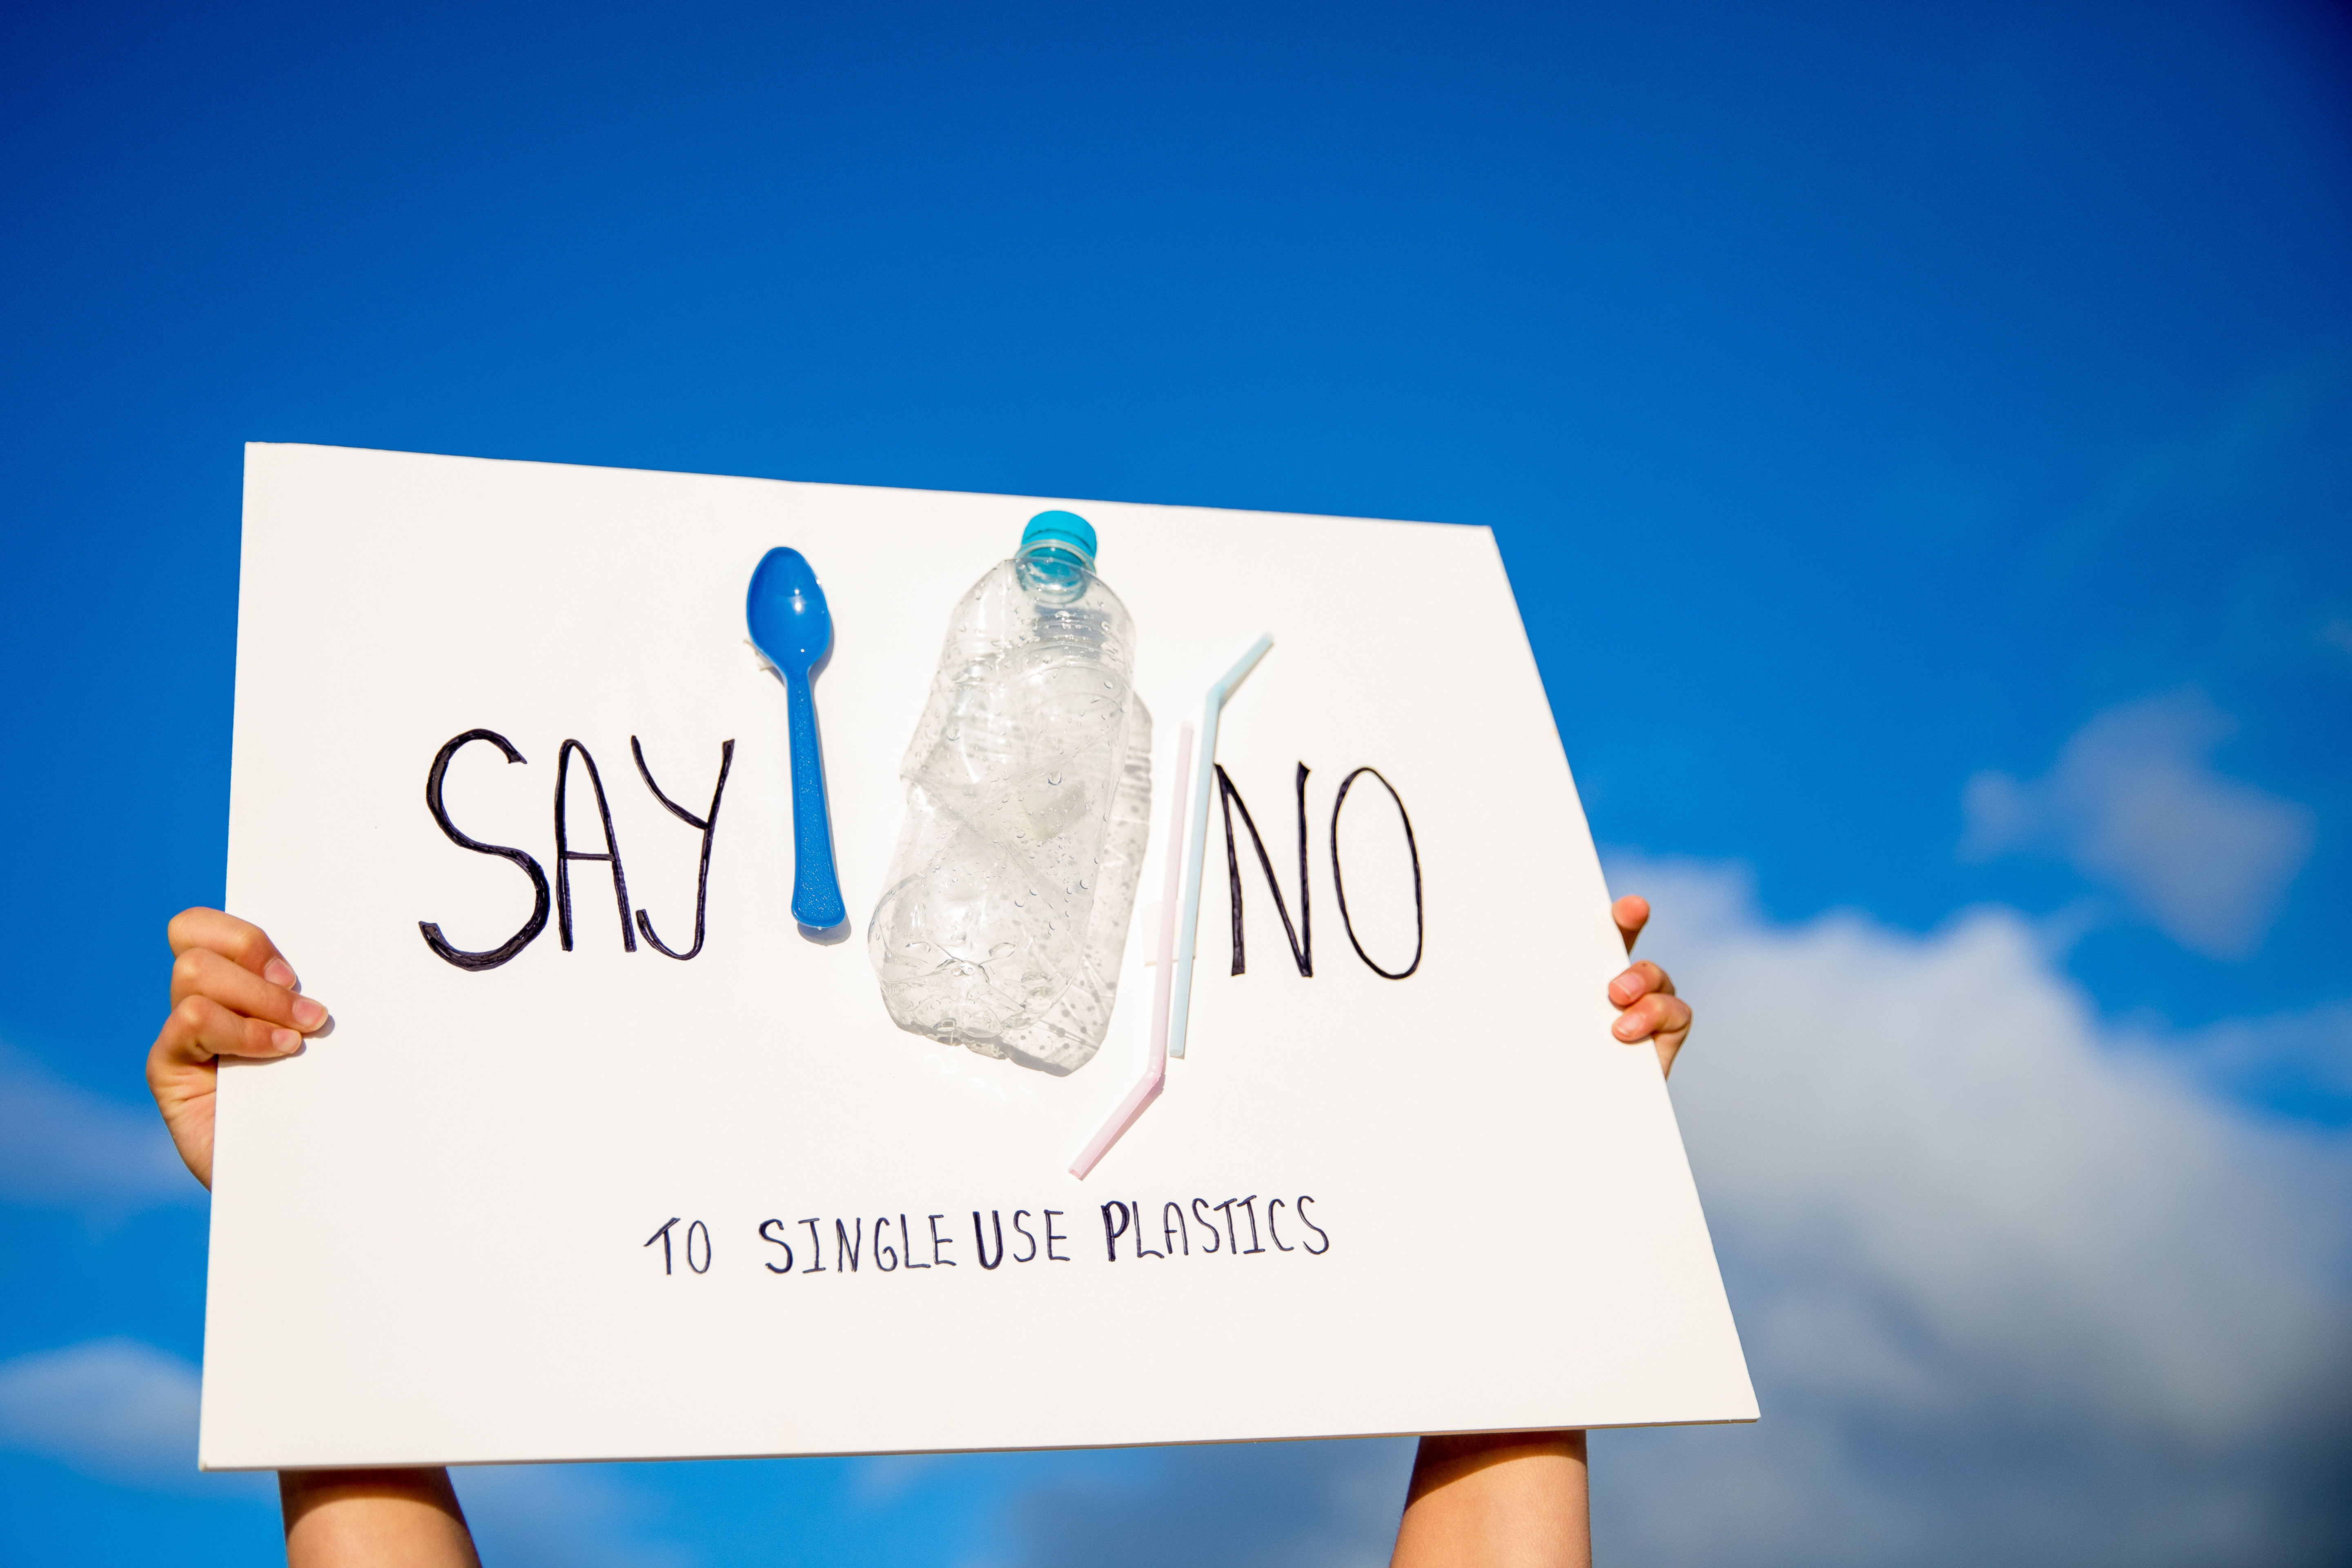 Someone holding a say no to single-use plastics banner